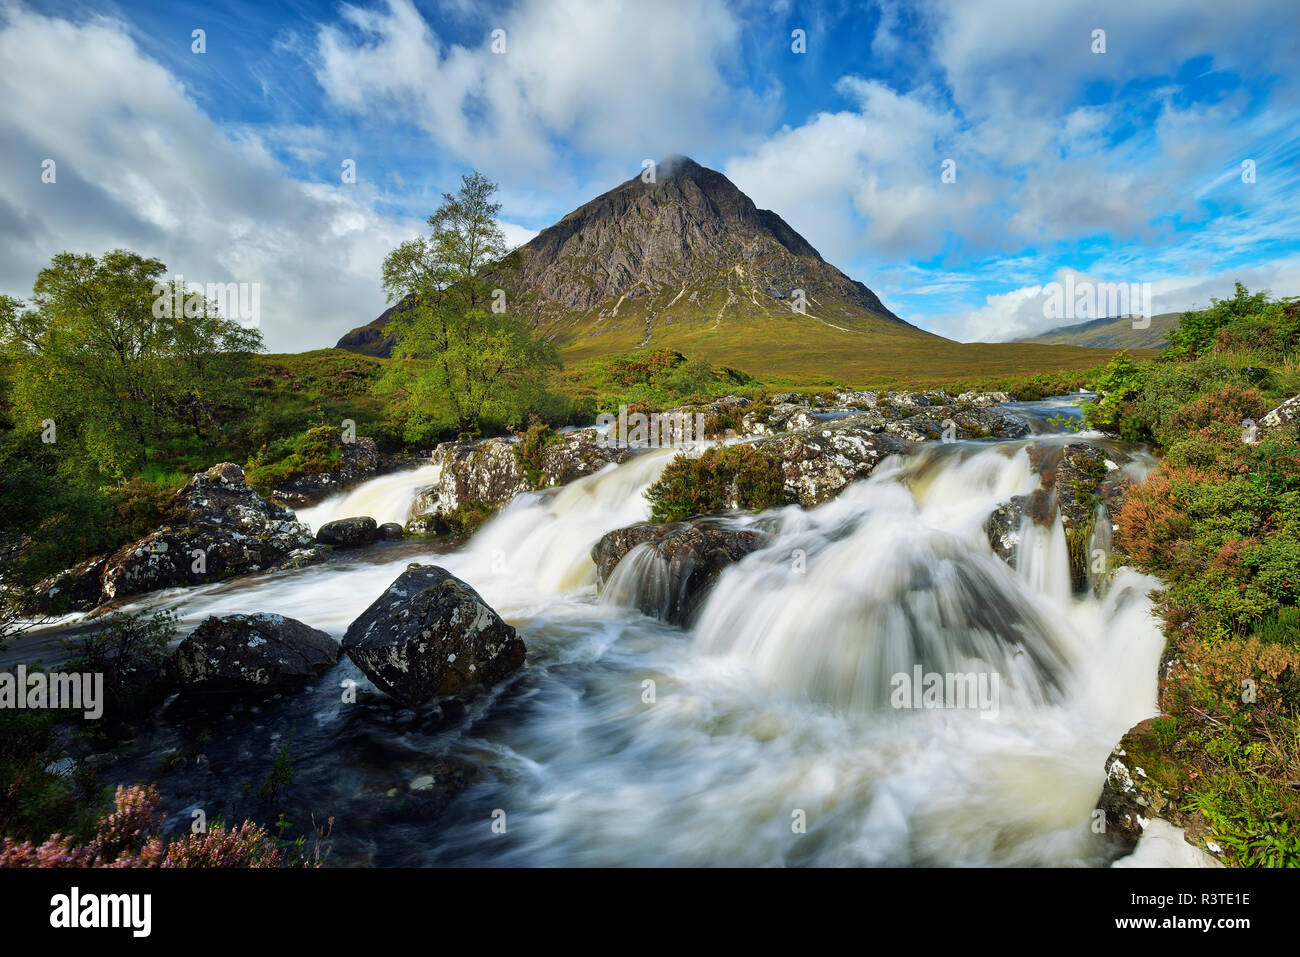 United Kingdom, Scotland, Glencoe, Highlands, Glen Coe, Coupall Falls of River Coupall with mountain Buachaille Etive Mor in background Stock Photo